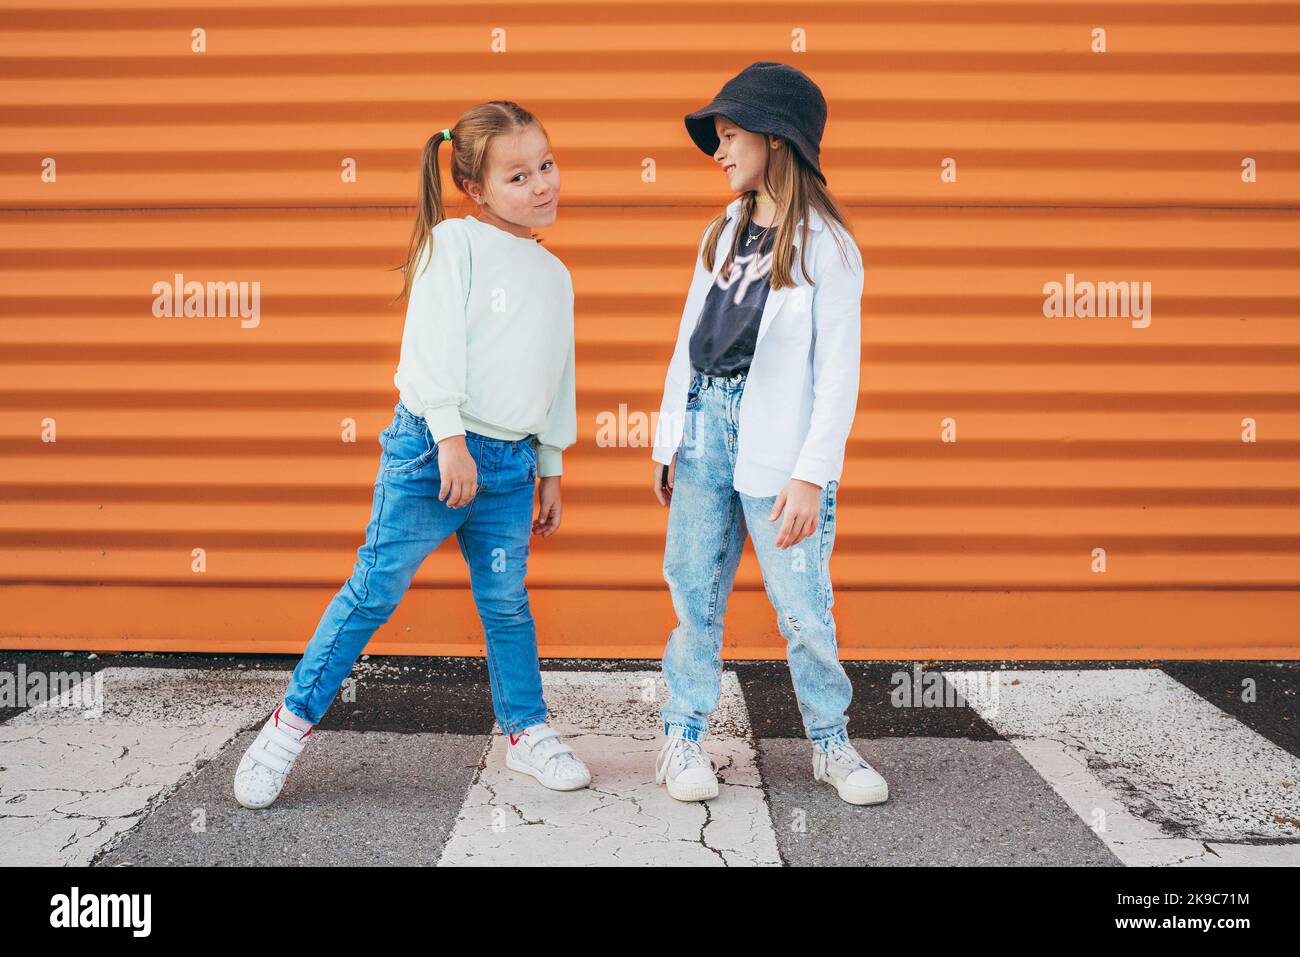 https://c8.alamy.com/comp/2K9C71M/two-little-girls-sisters-dressed-kids-fashion-vogue-style-clothes-posing-at-camera-on-the-city-pedestrian-asphalt-road-near-the-orange-wall-background-2K9C71M.jpg